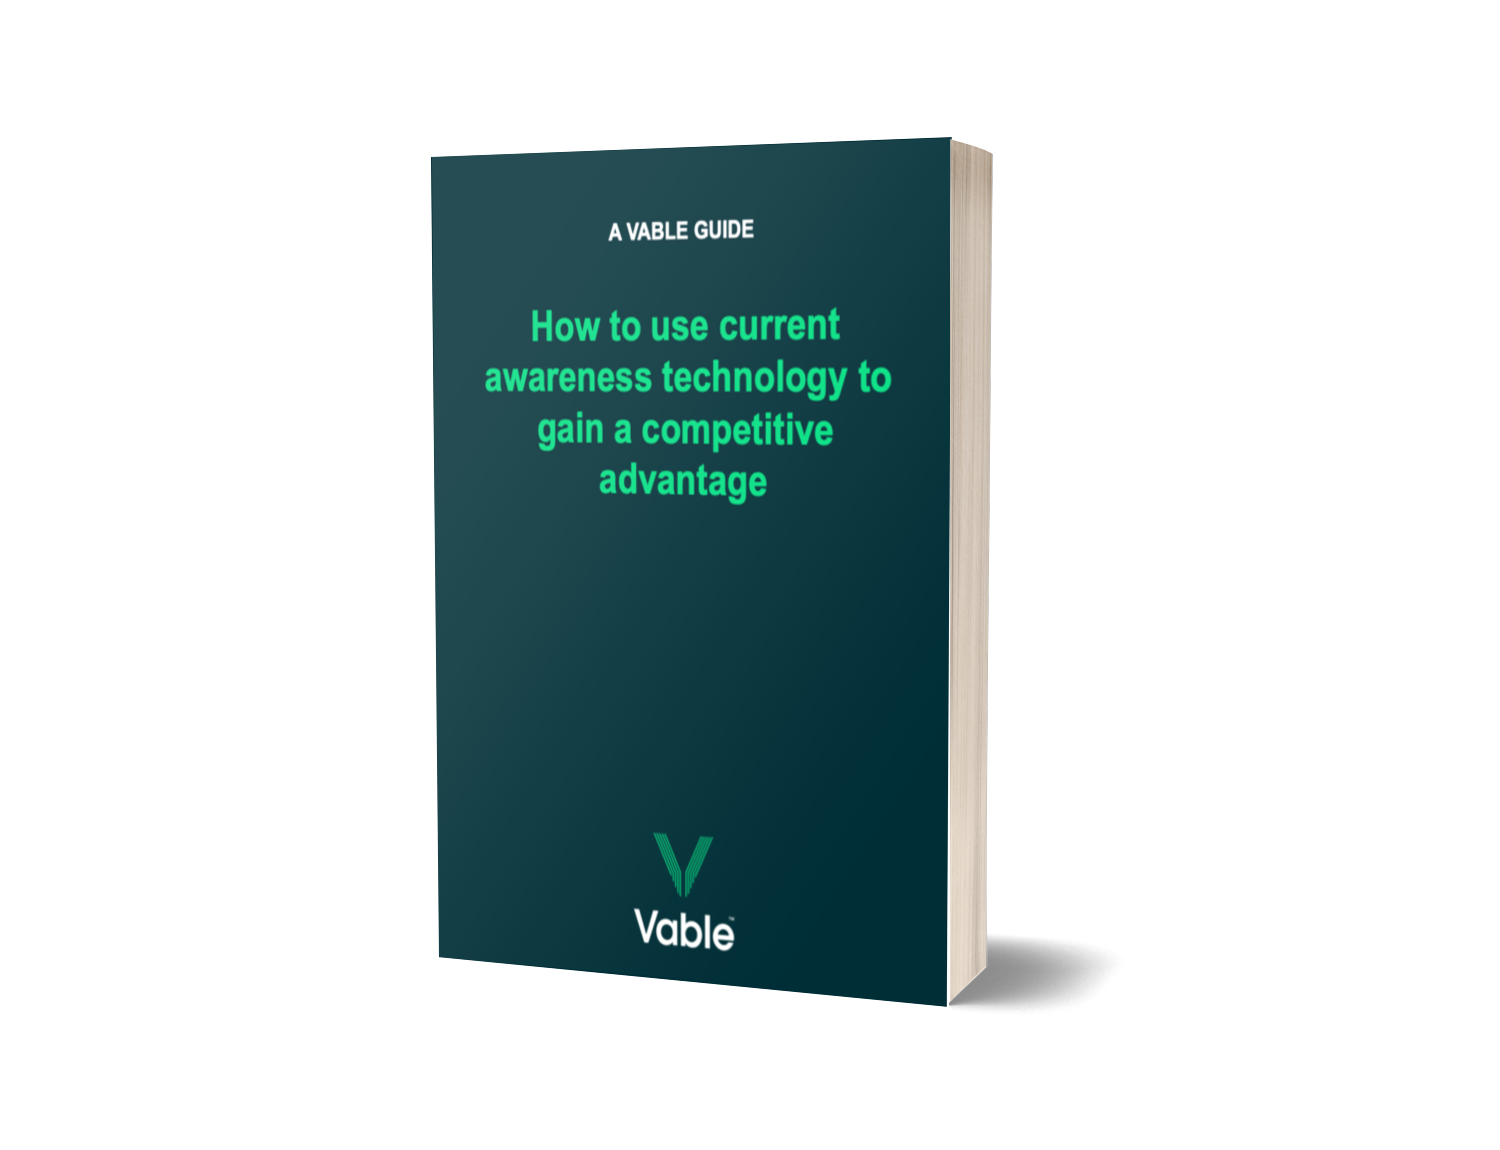 How to use current awareness technology to gain a competitive advantage - book cover